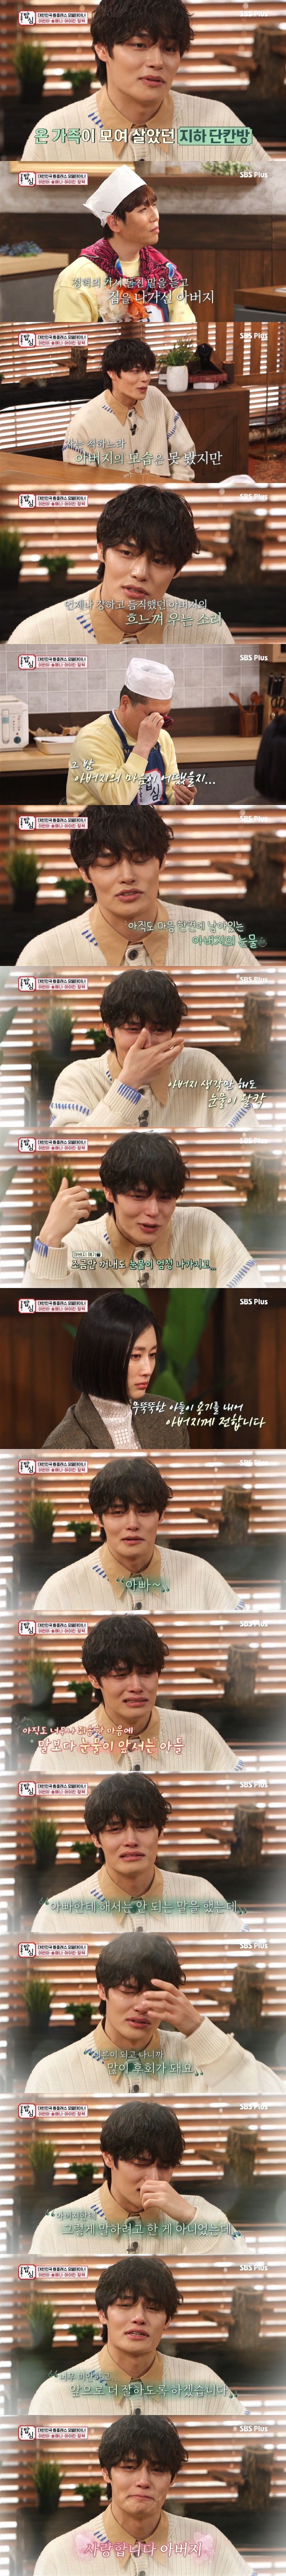 Jung Hyuk, a model who cries while talking about his regretful behavior in high school.